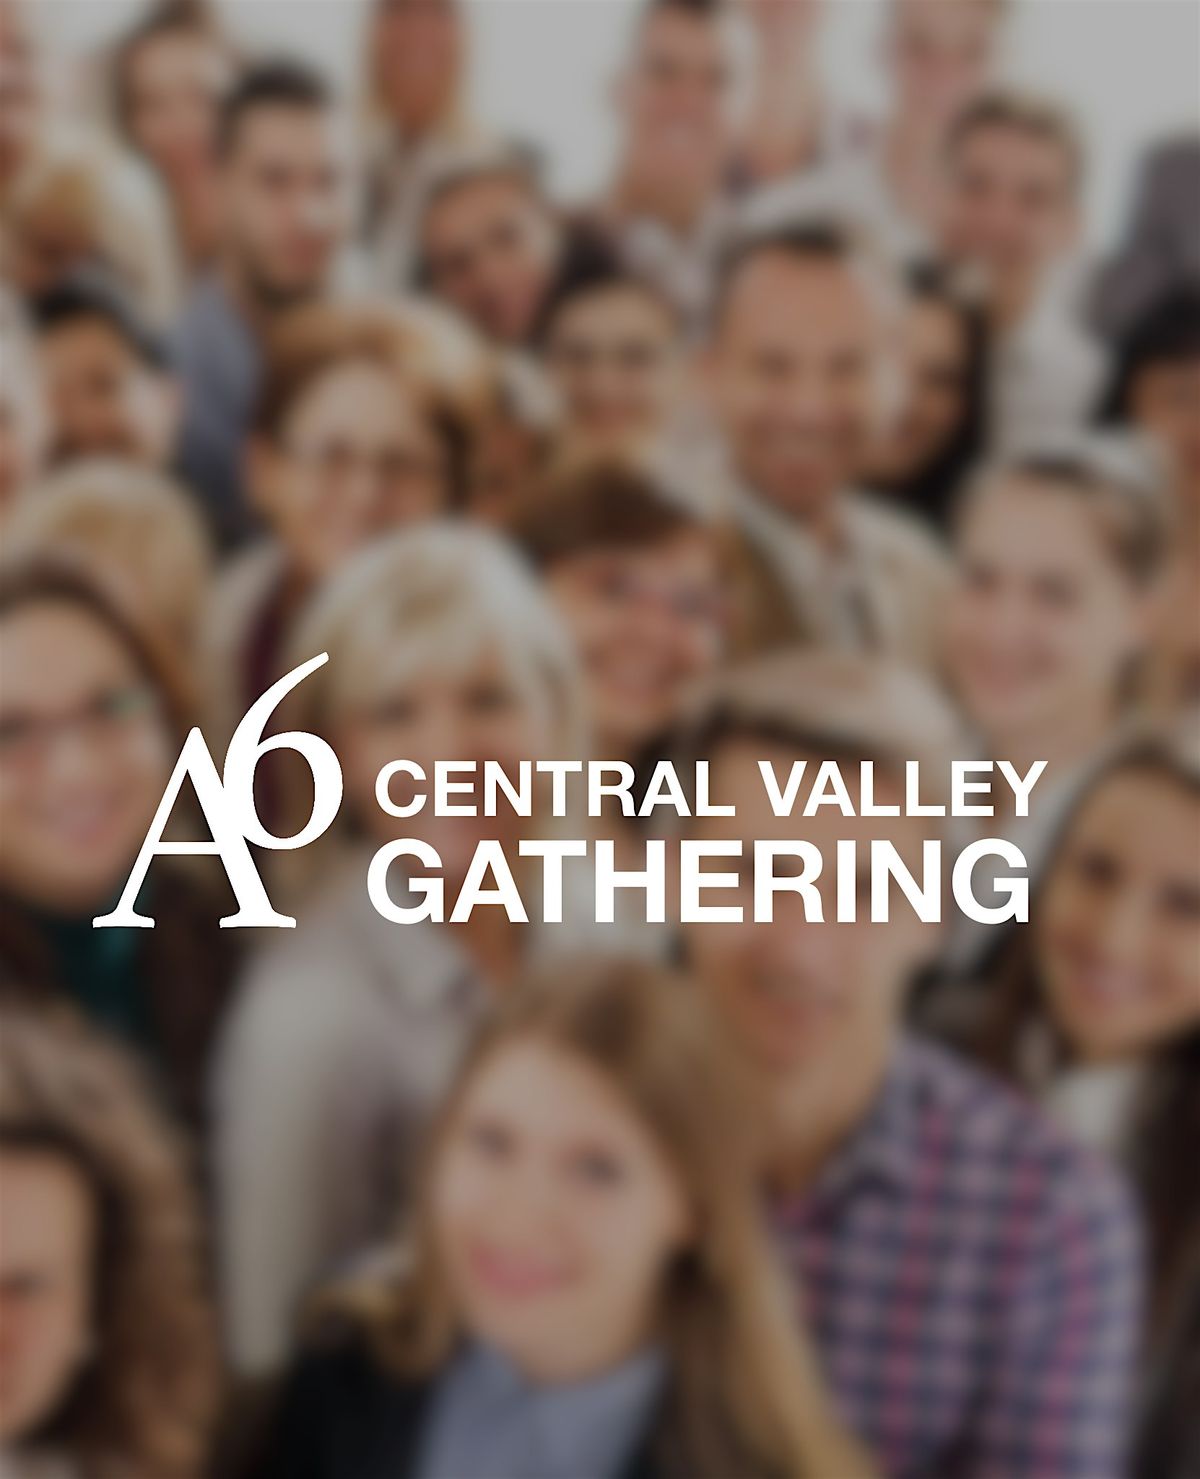 The Central Valley A6 Gathering